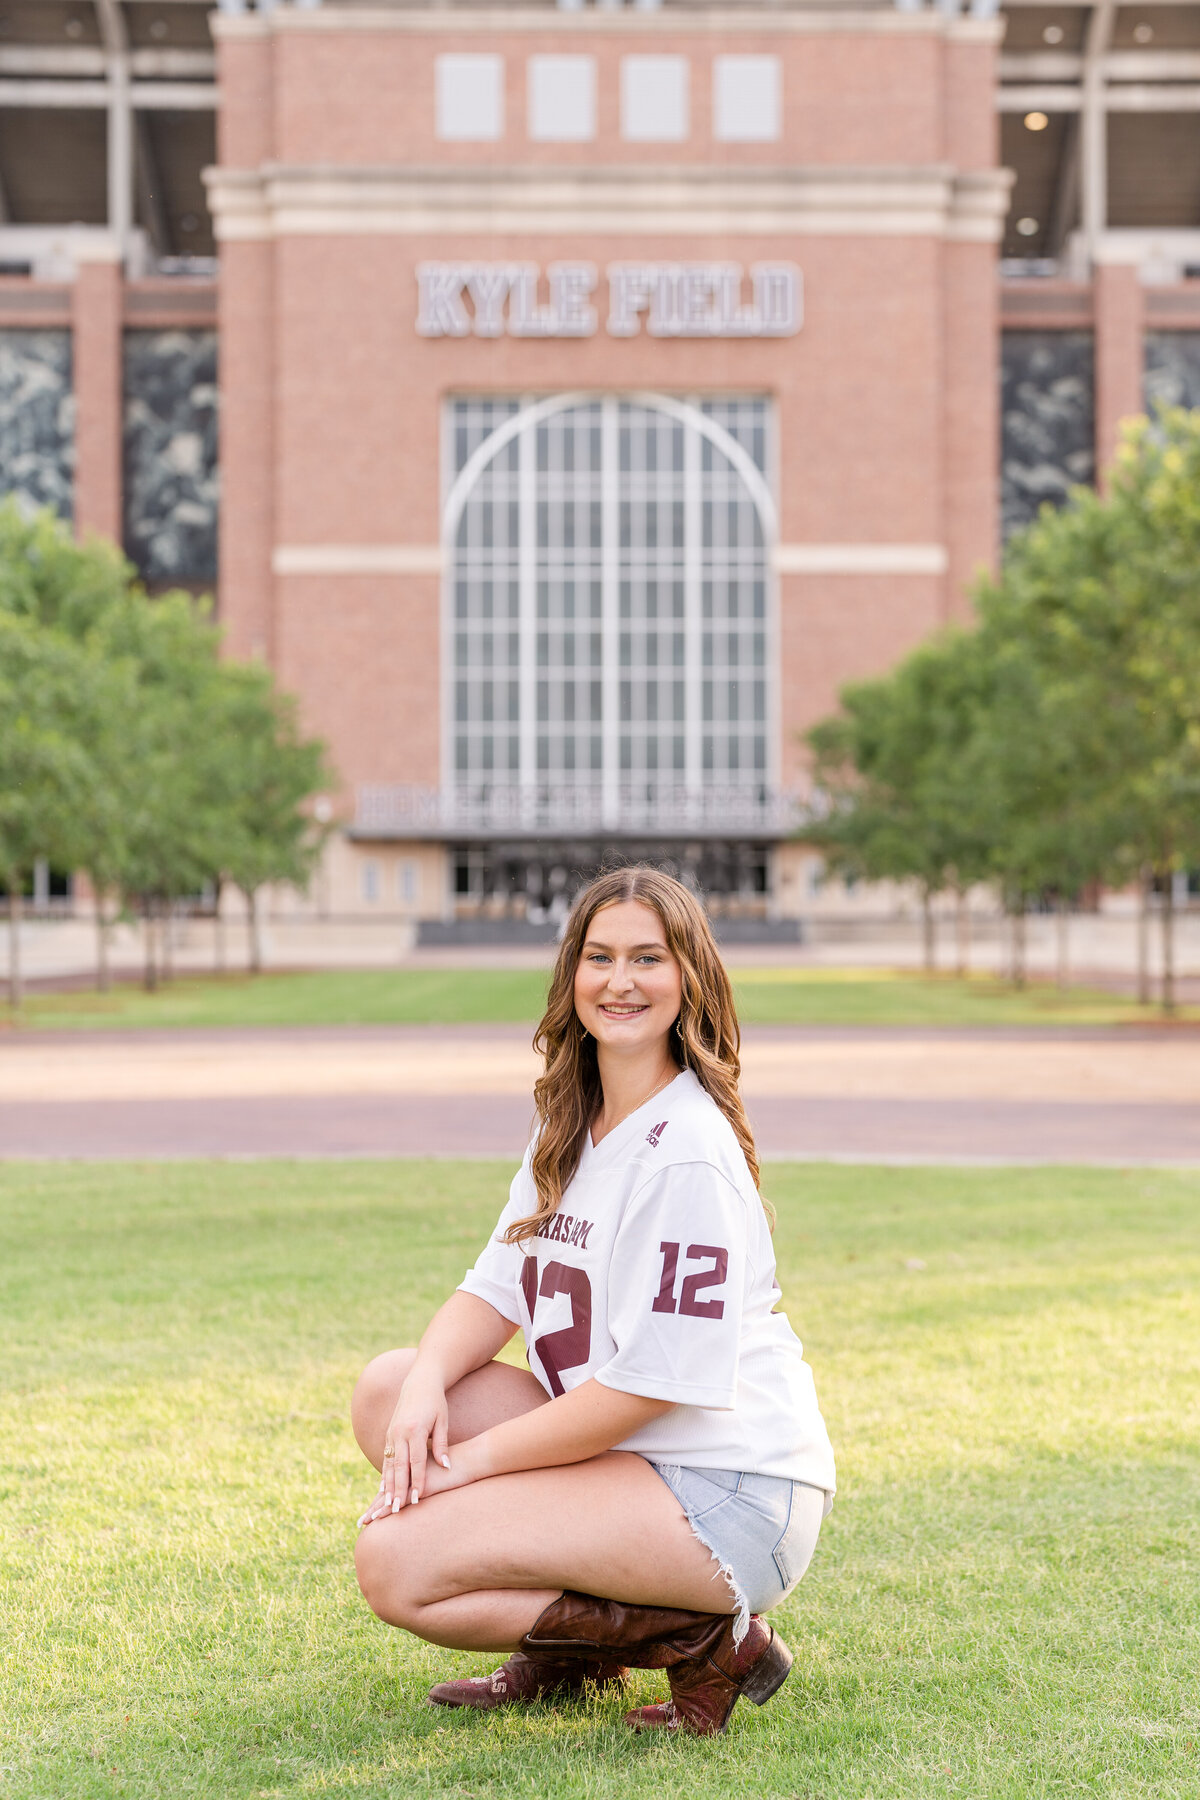 Texas A&M senior girl kneeling down and smiling while wearing Aggie white jersey in Aggie Park